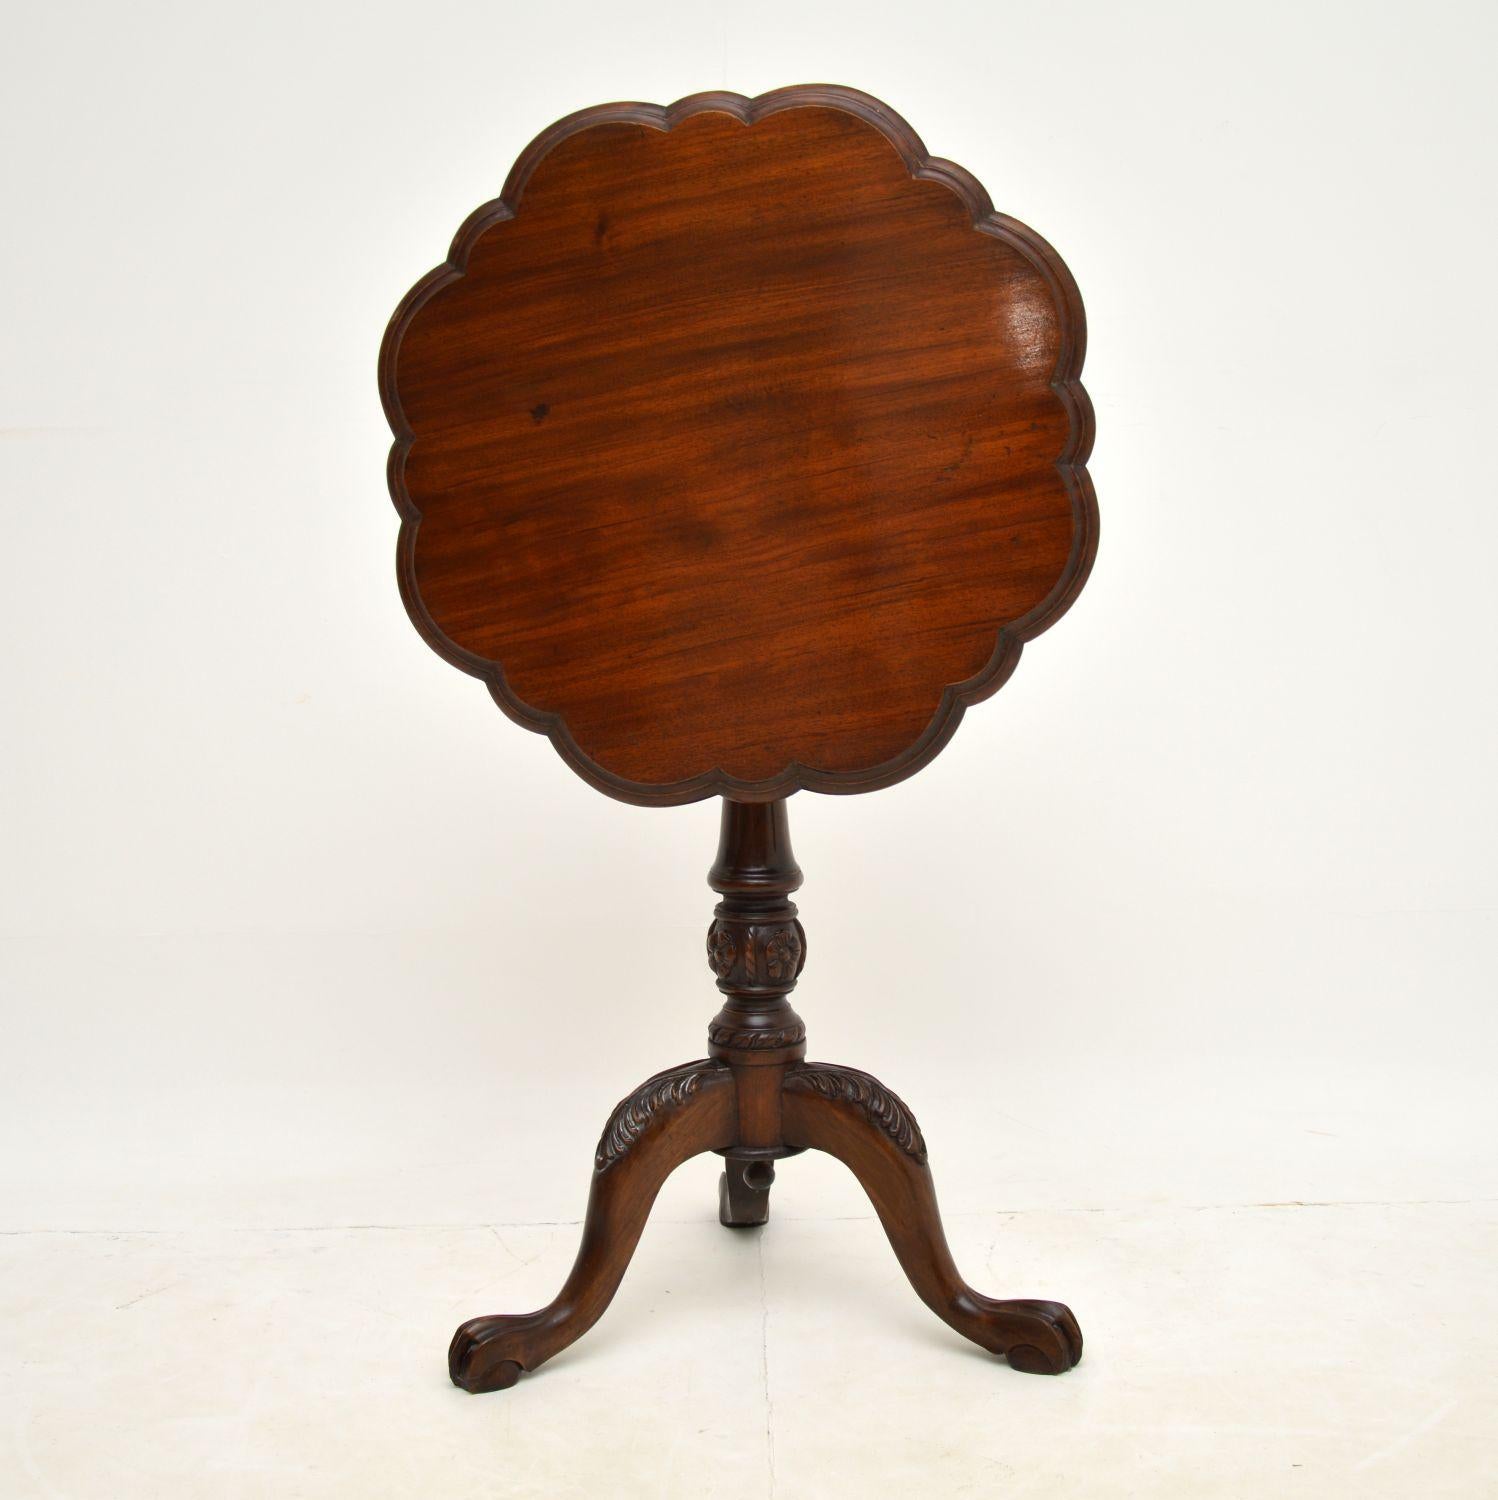 A stunning antique Victorian flip top side table in solid mahogany, with a spinning top & dating to around the 1850 period.

The shape is very unusual and really gorgeous. It has a flower shaped top, sitting on a birdcage support on top of a